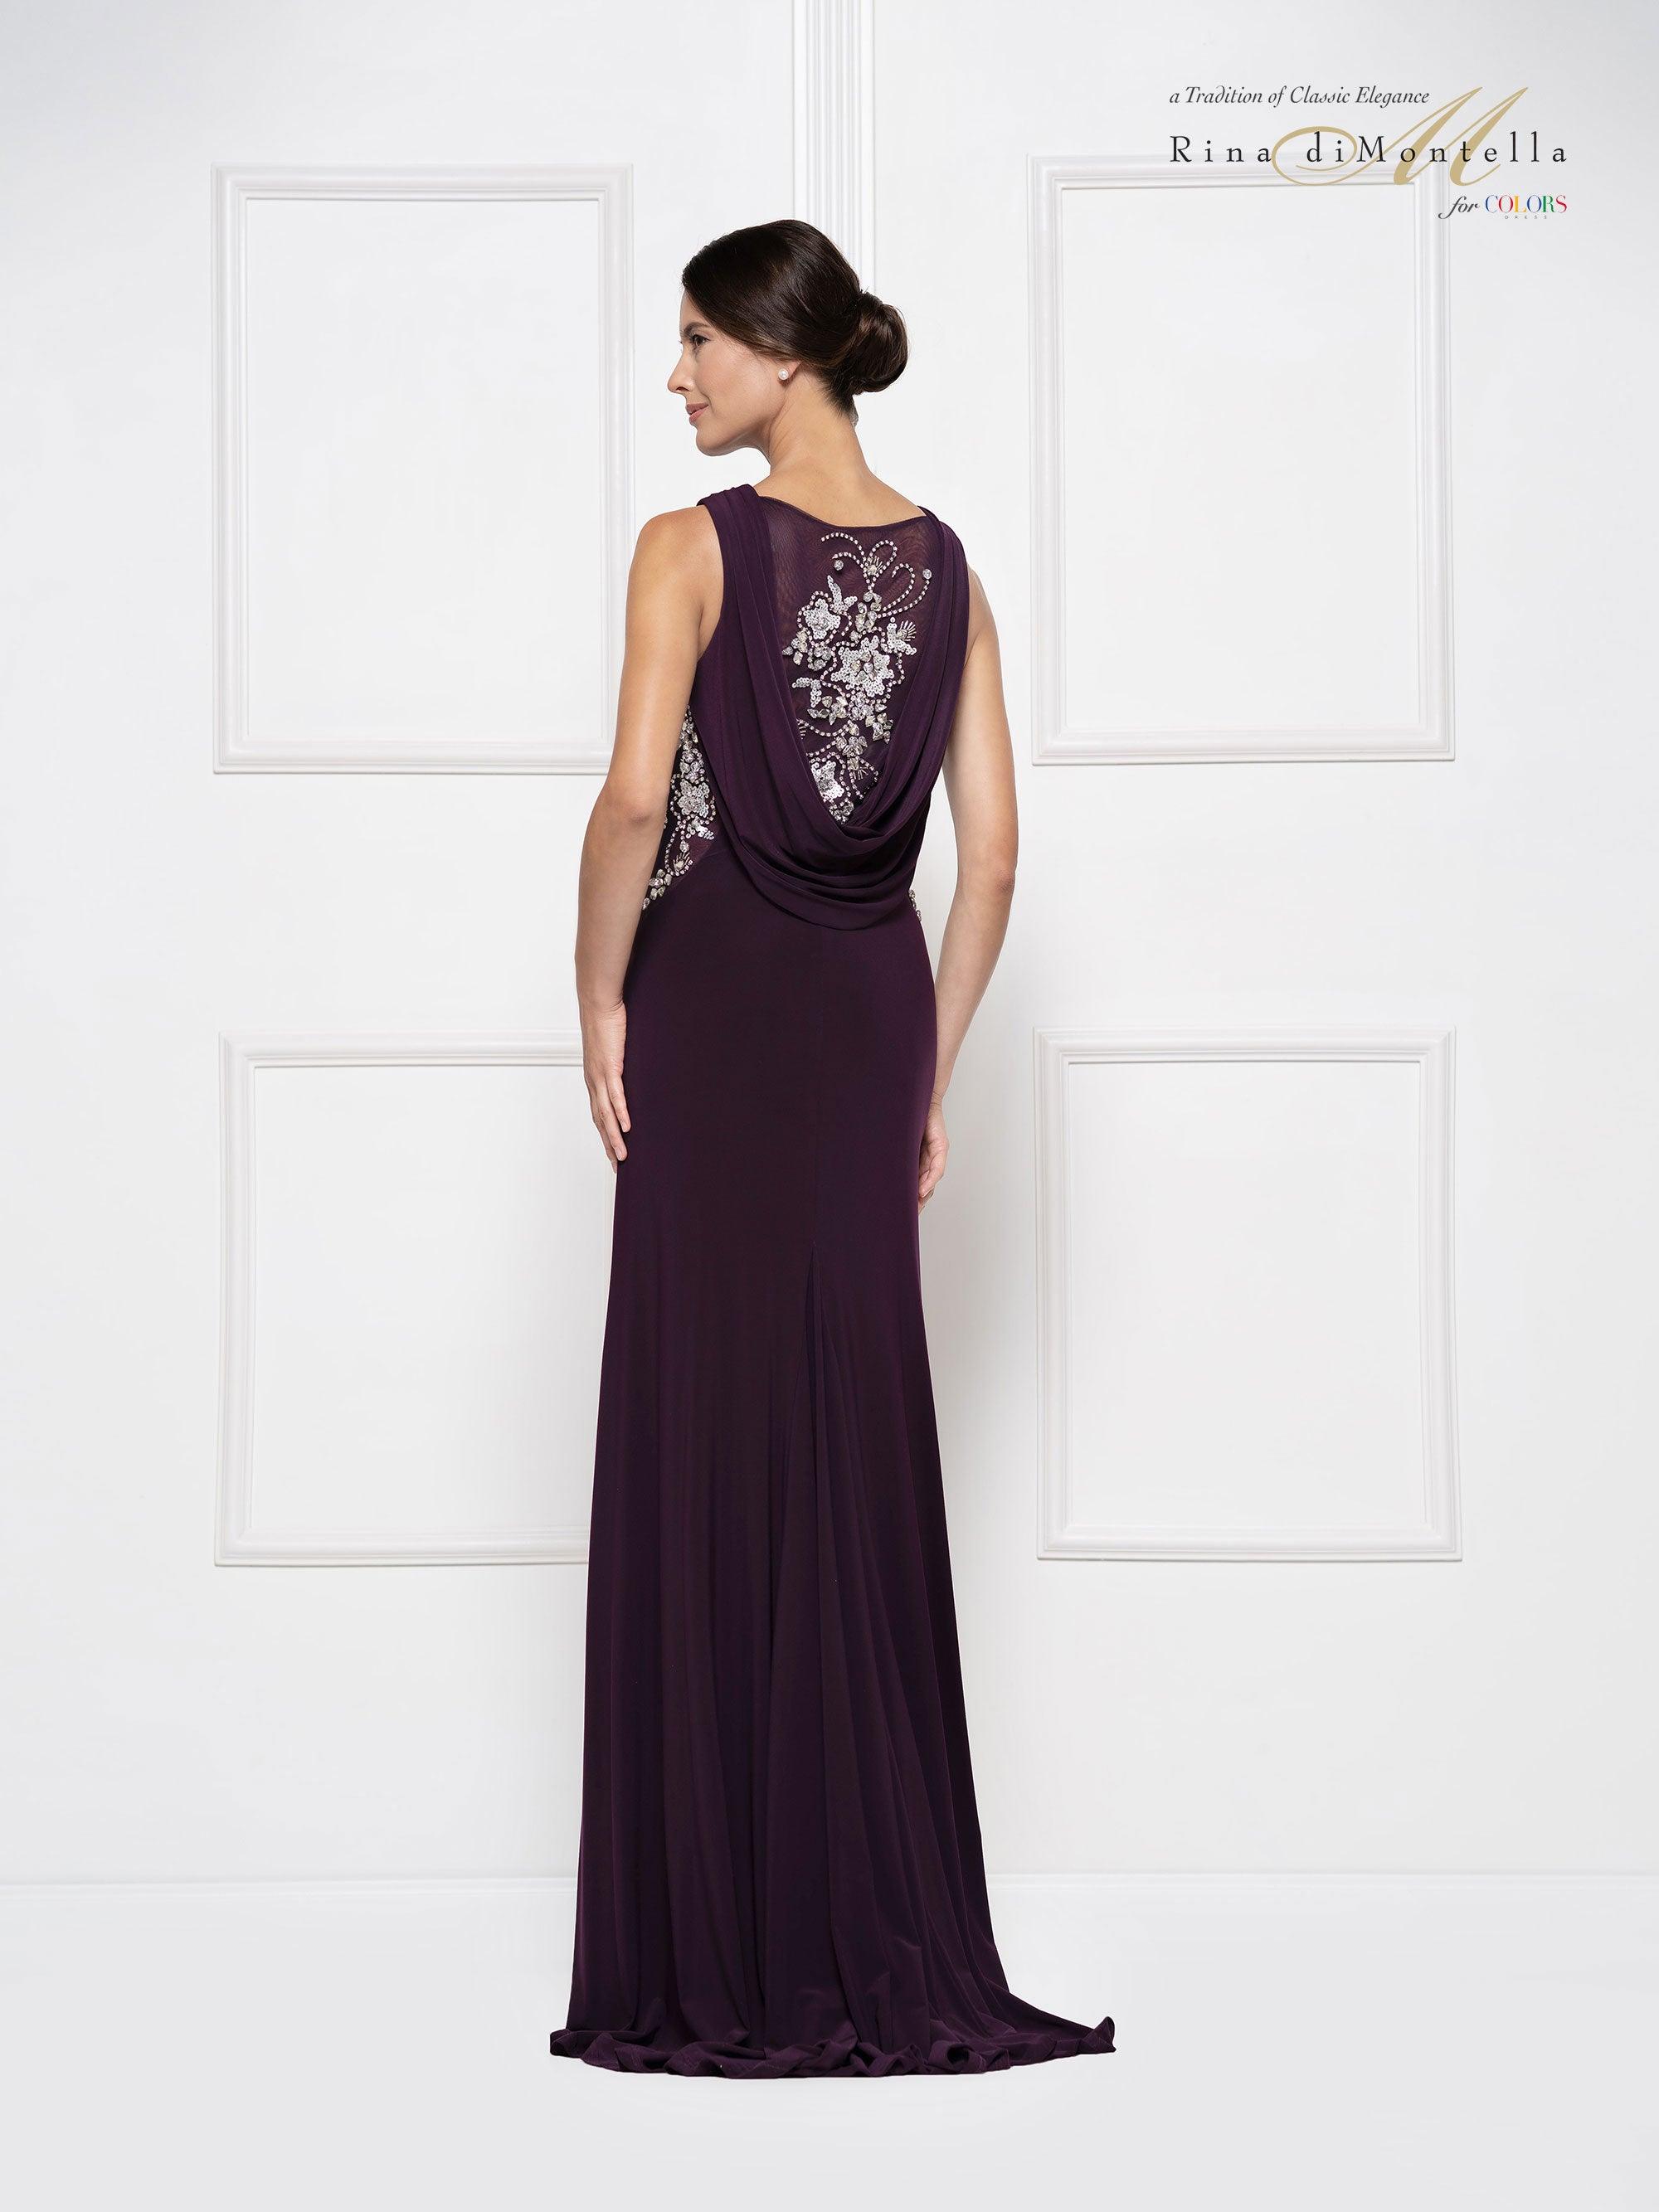 Rina Di Montella Long Formal Fitted Dress 2029 - The Dress Outlet